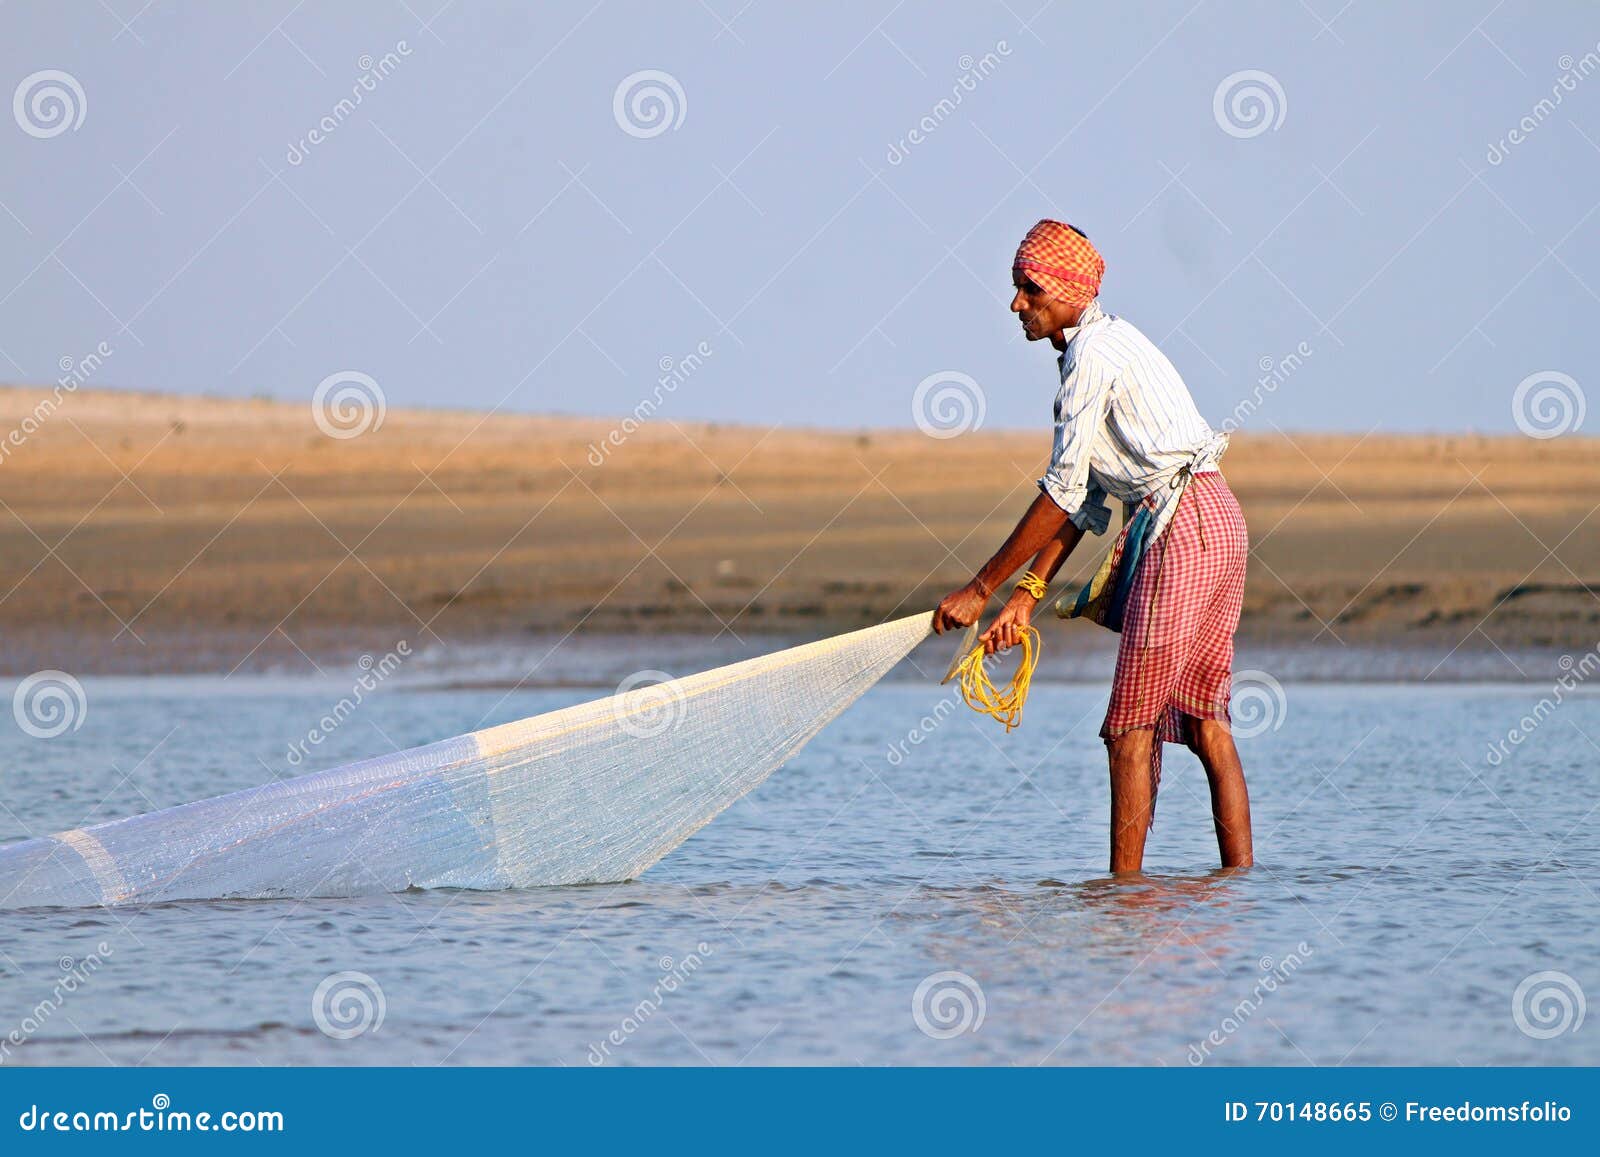 A Fisherman Catches Fish by Traditional Hand Net in India